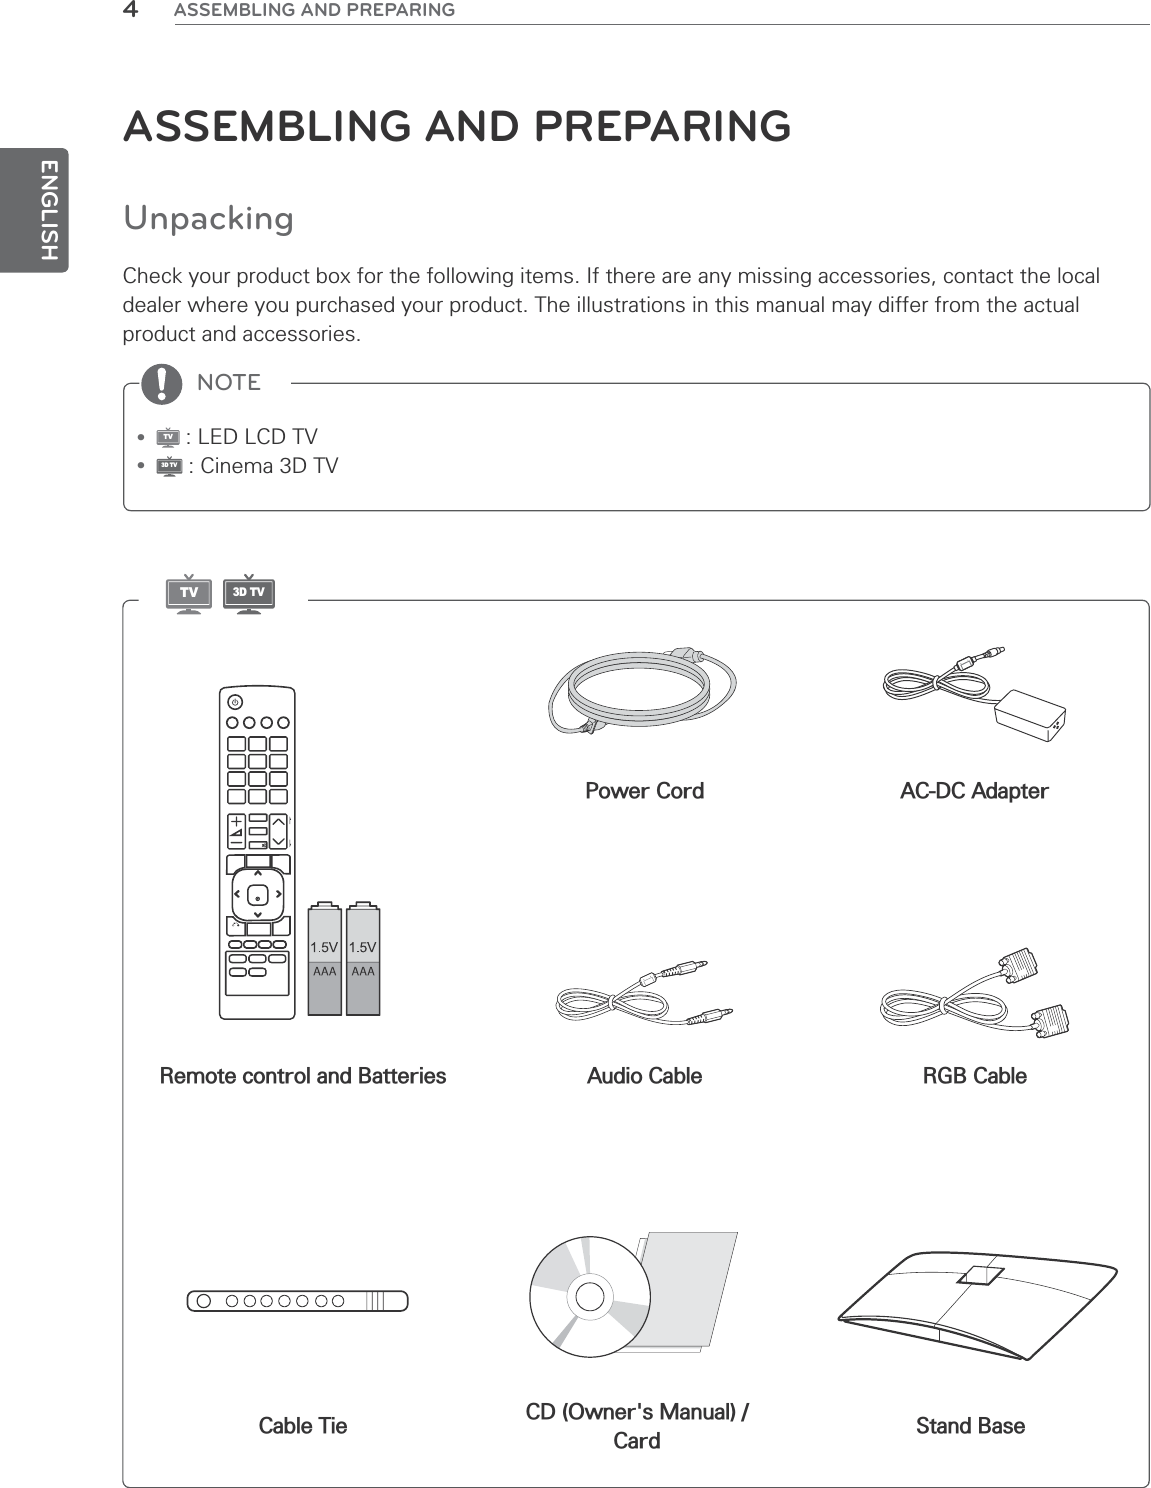 ENGLISH4ASSEMBLING AND PREPARINGNOTEASSEMBLING AND PREPARINGUnpackingCheck your product box for the following items. If there are any missing accessories, contact the local dealer where you purchased your product. The illustrations in this manual may differ from the actual product and accessories.yTV : LED LCD TVy3D TV : Cinema 3D TVRemote control and BatteriesStand BasePower CordAudio CableCable Tie CD (Owner&apos;s Manual) /CardAC-DC AdapterRGB CableTV3D TV